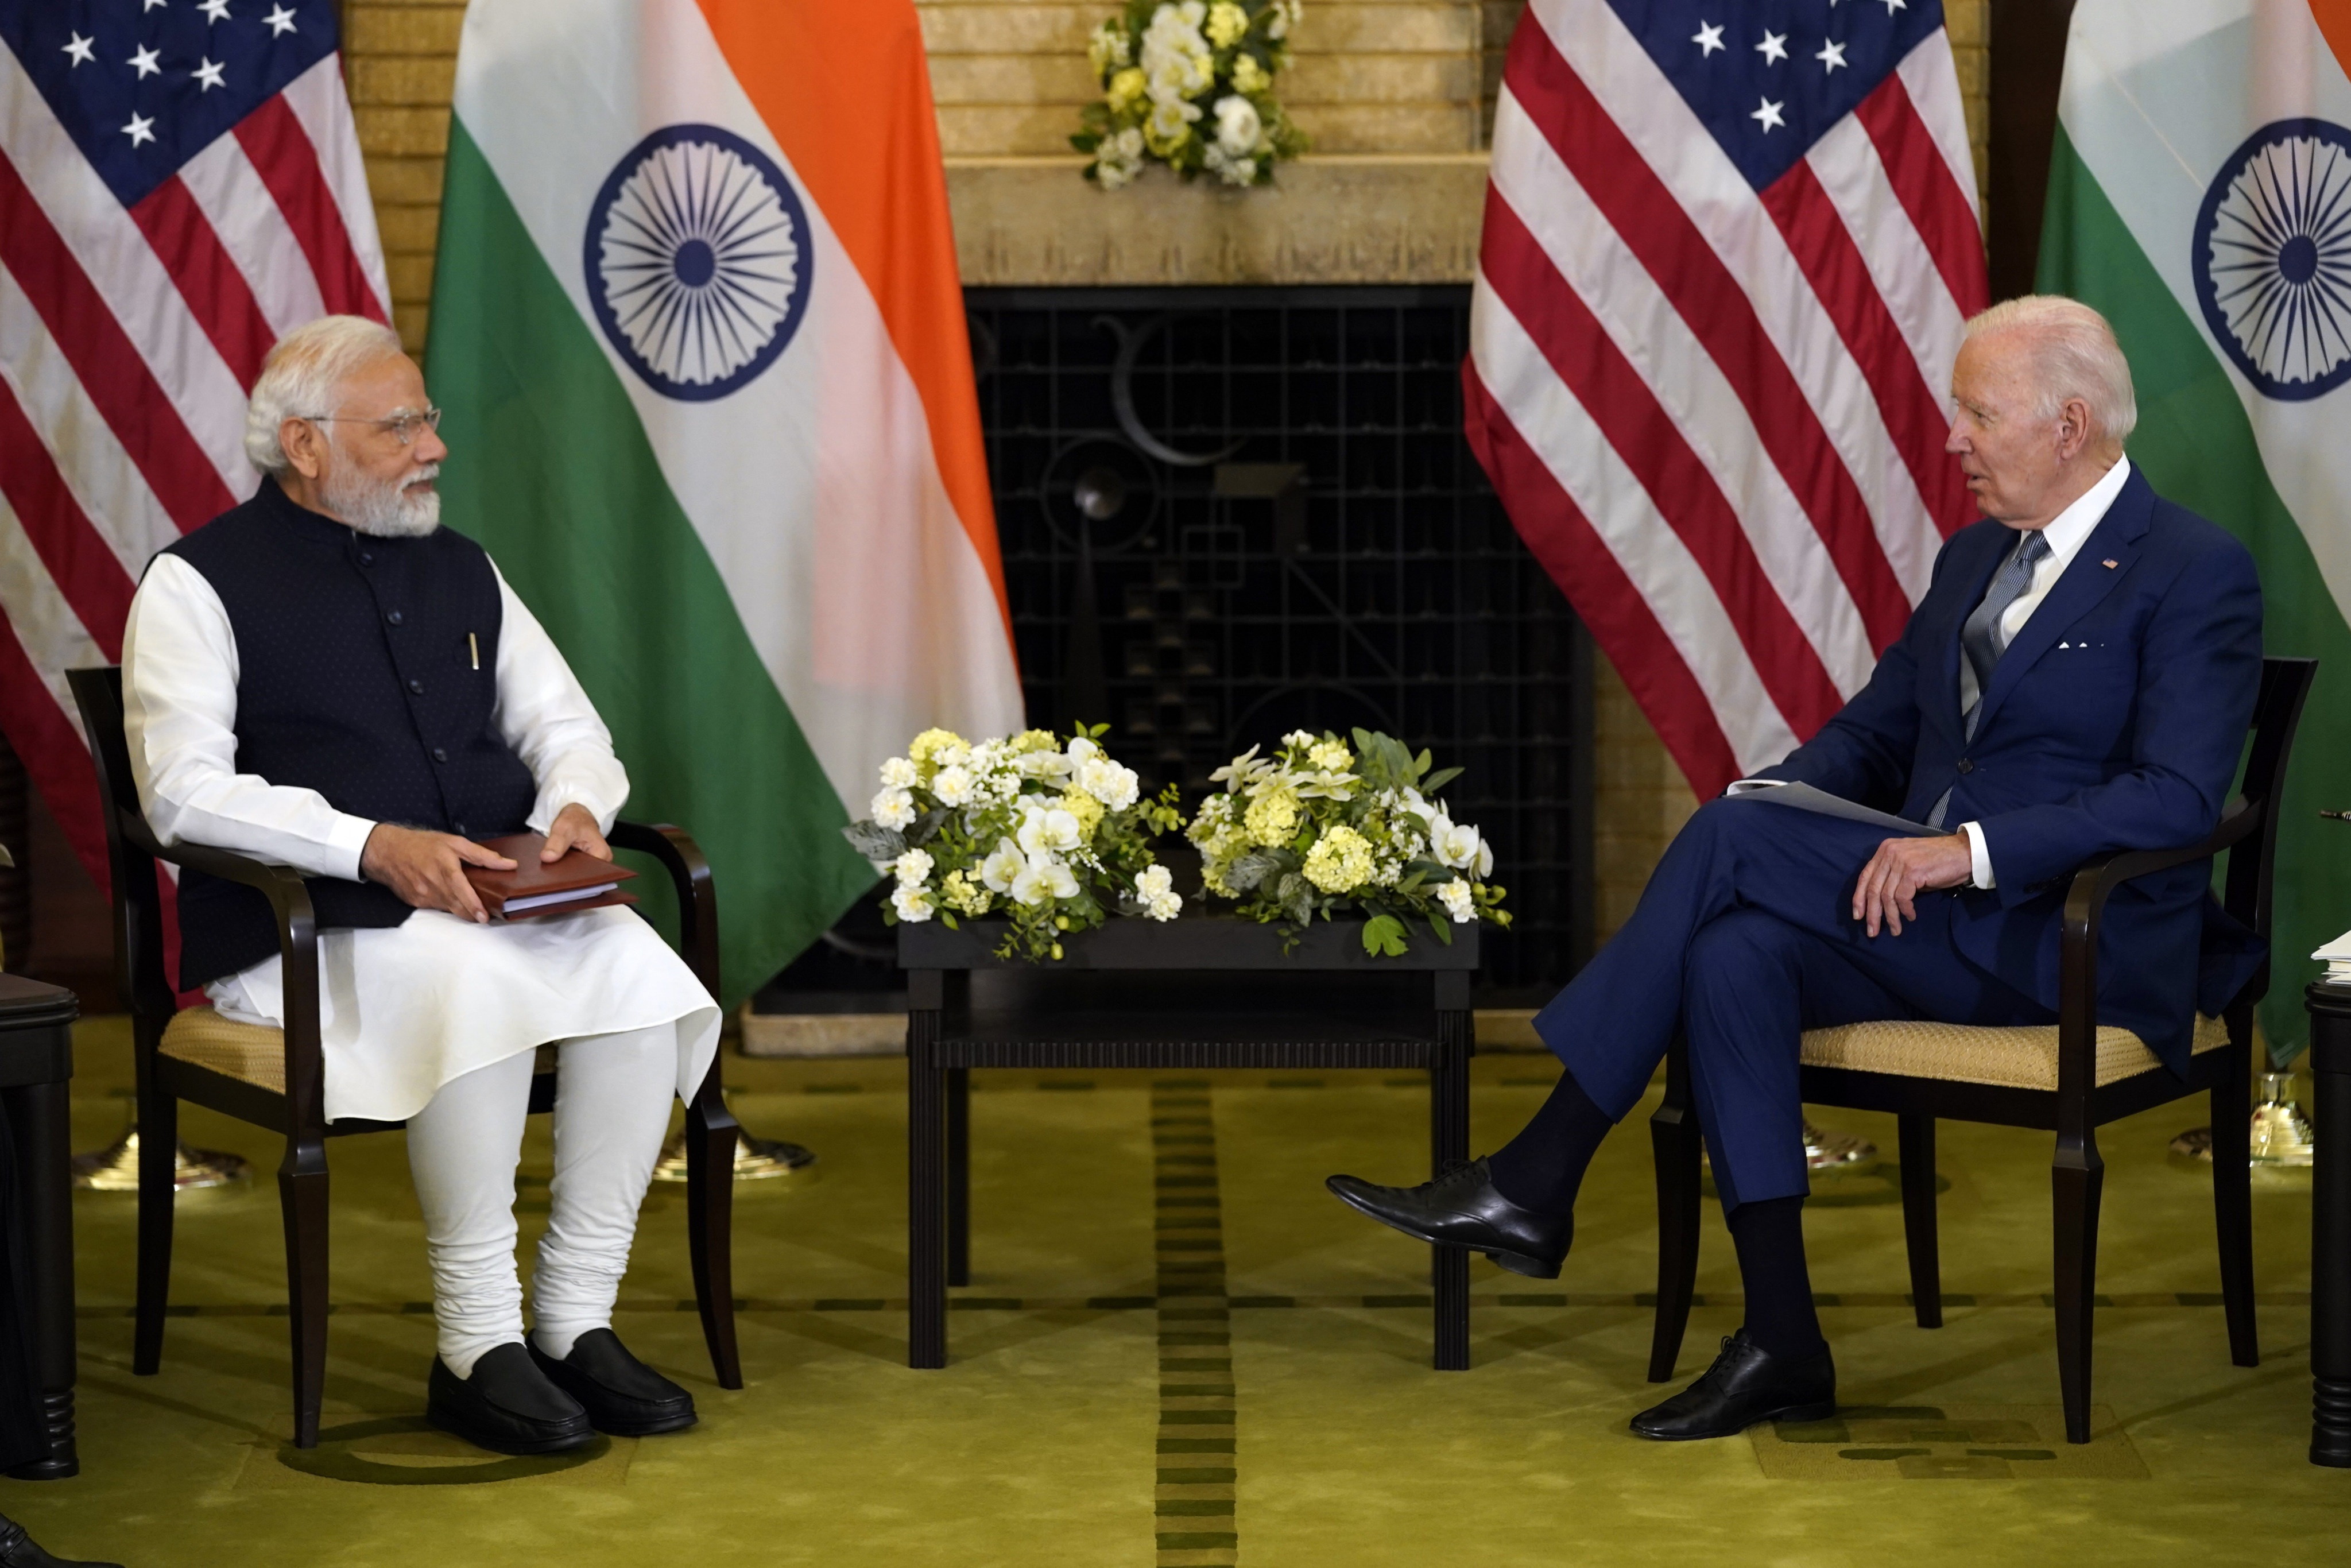 Indian Prime Minister Narendra Modi meets US President Joe Biden during the Quad leaders summit in Tokyo on May 24. Photo: AP